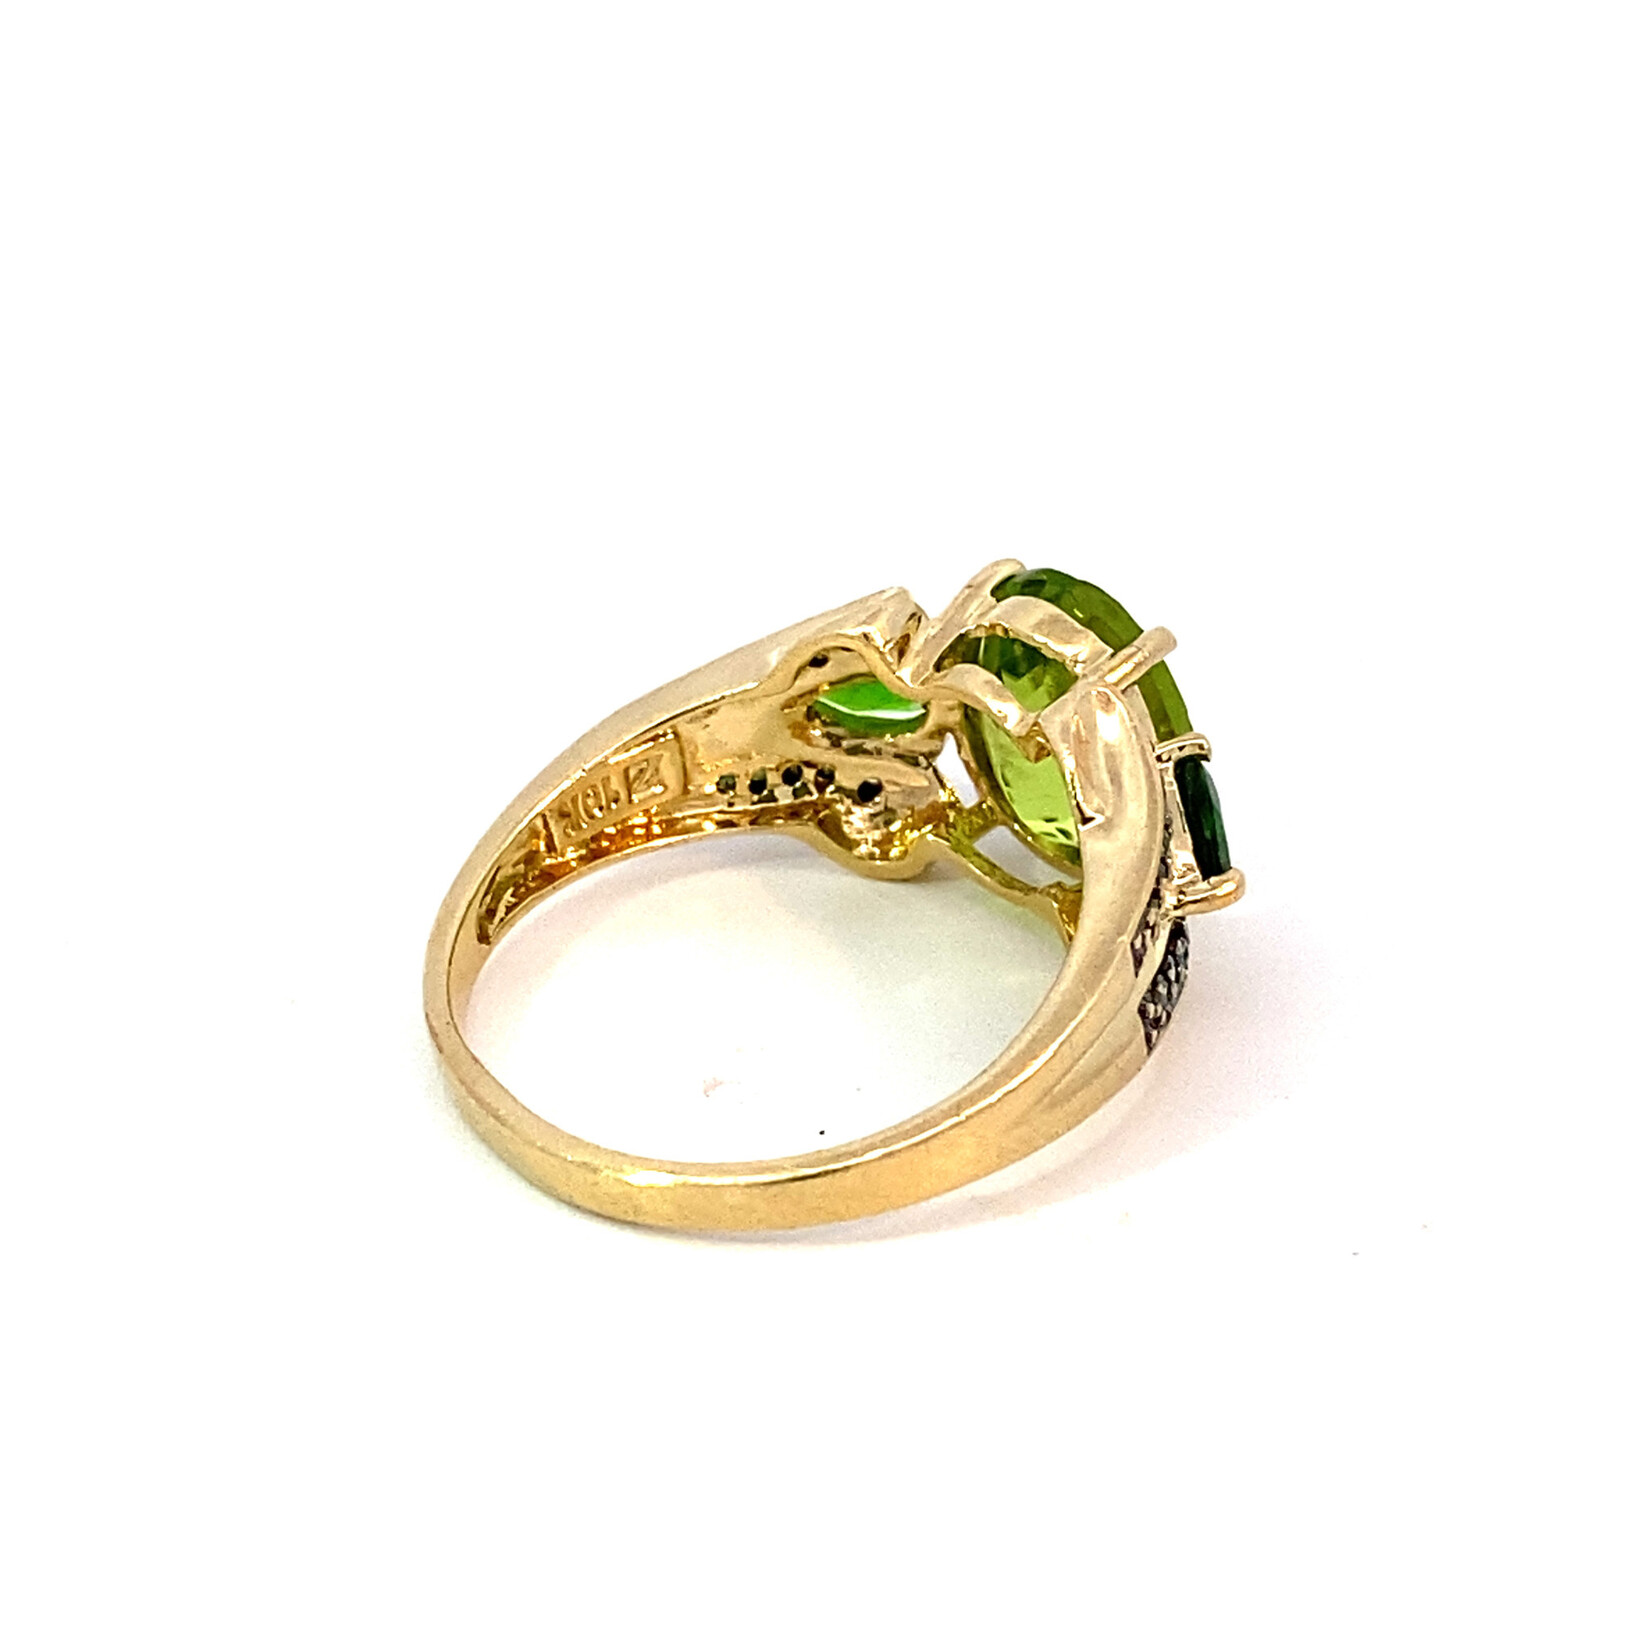 10K Yellow Gold Peridot, Chrome Diopside ring size 7.75